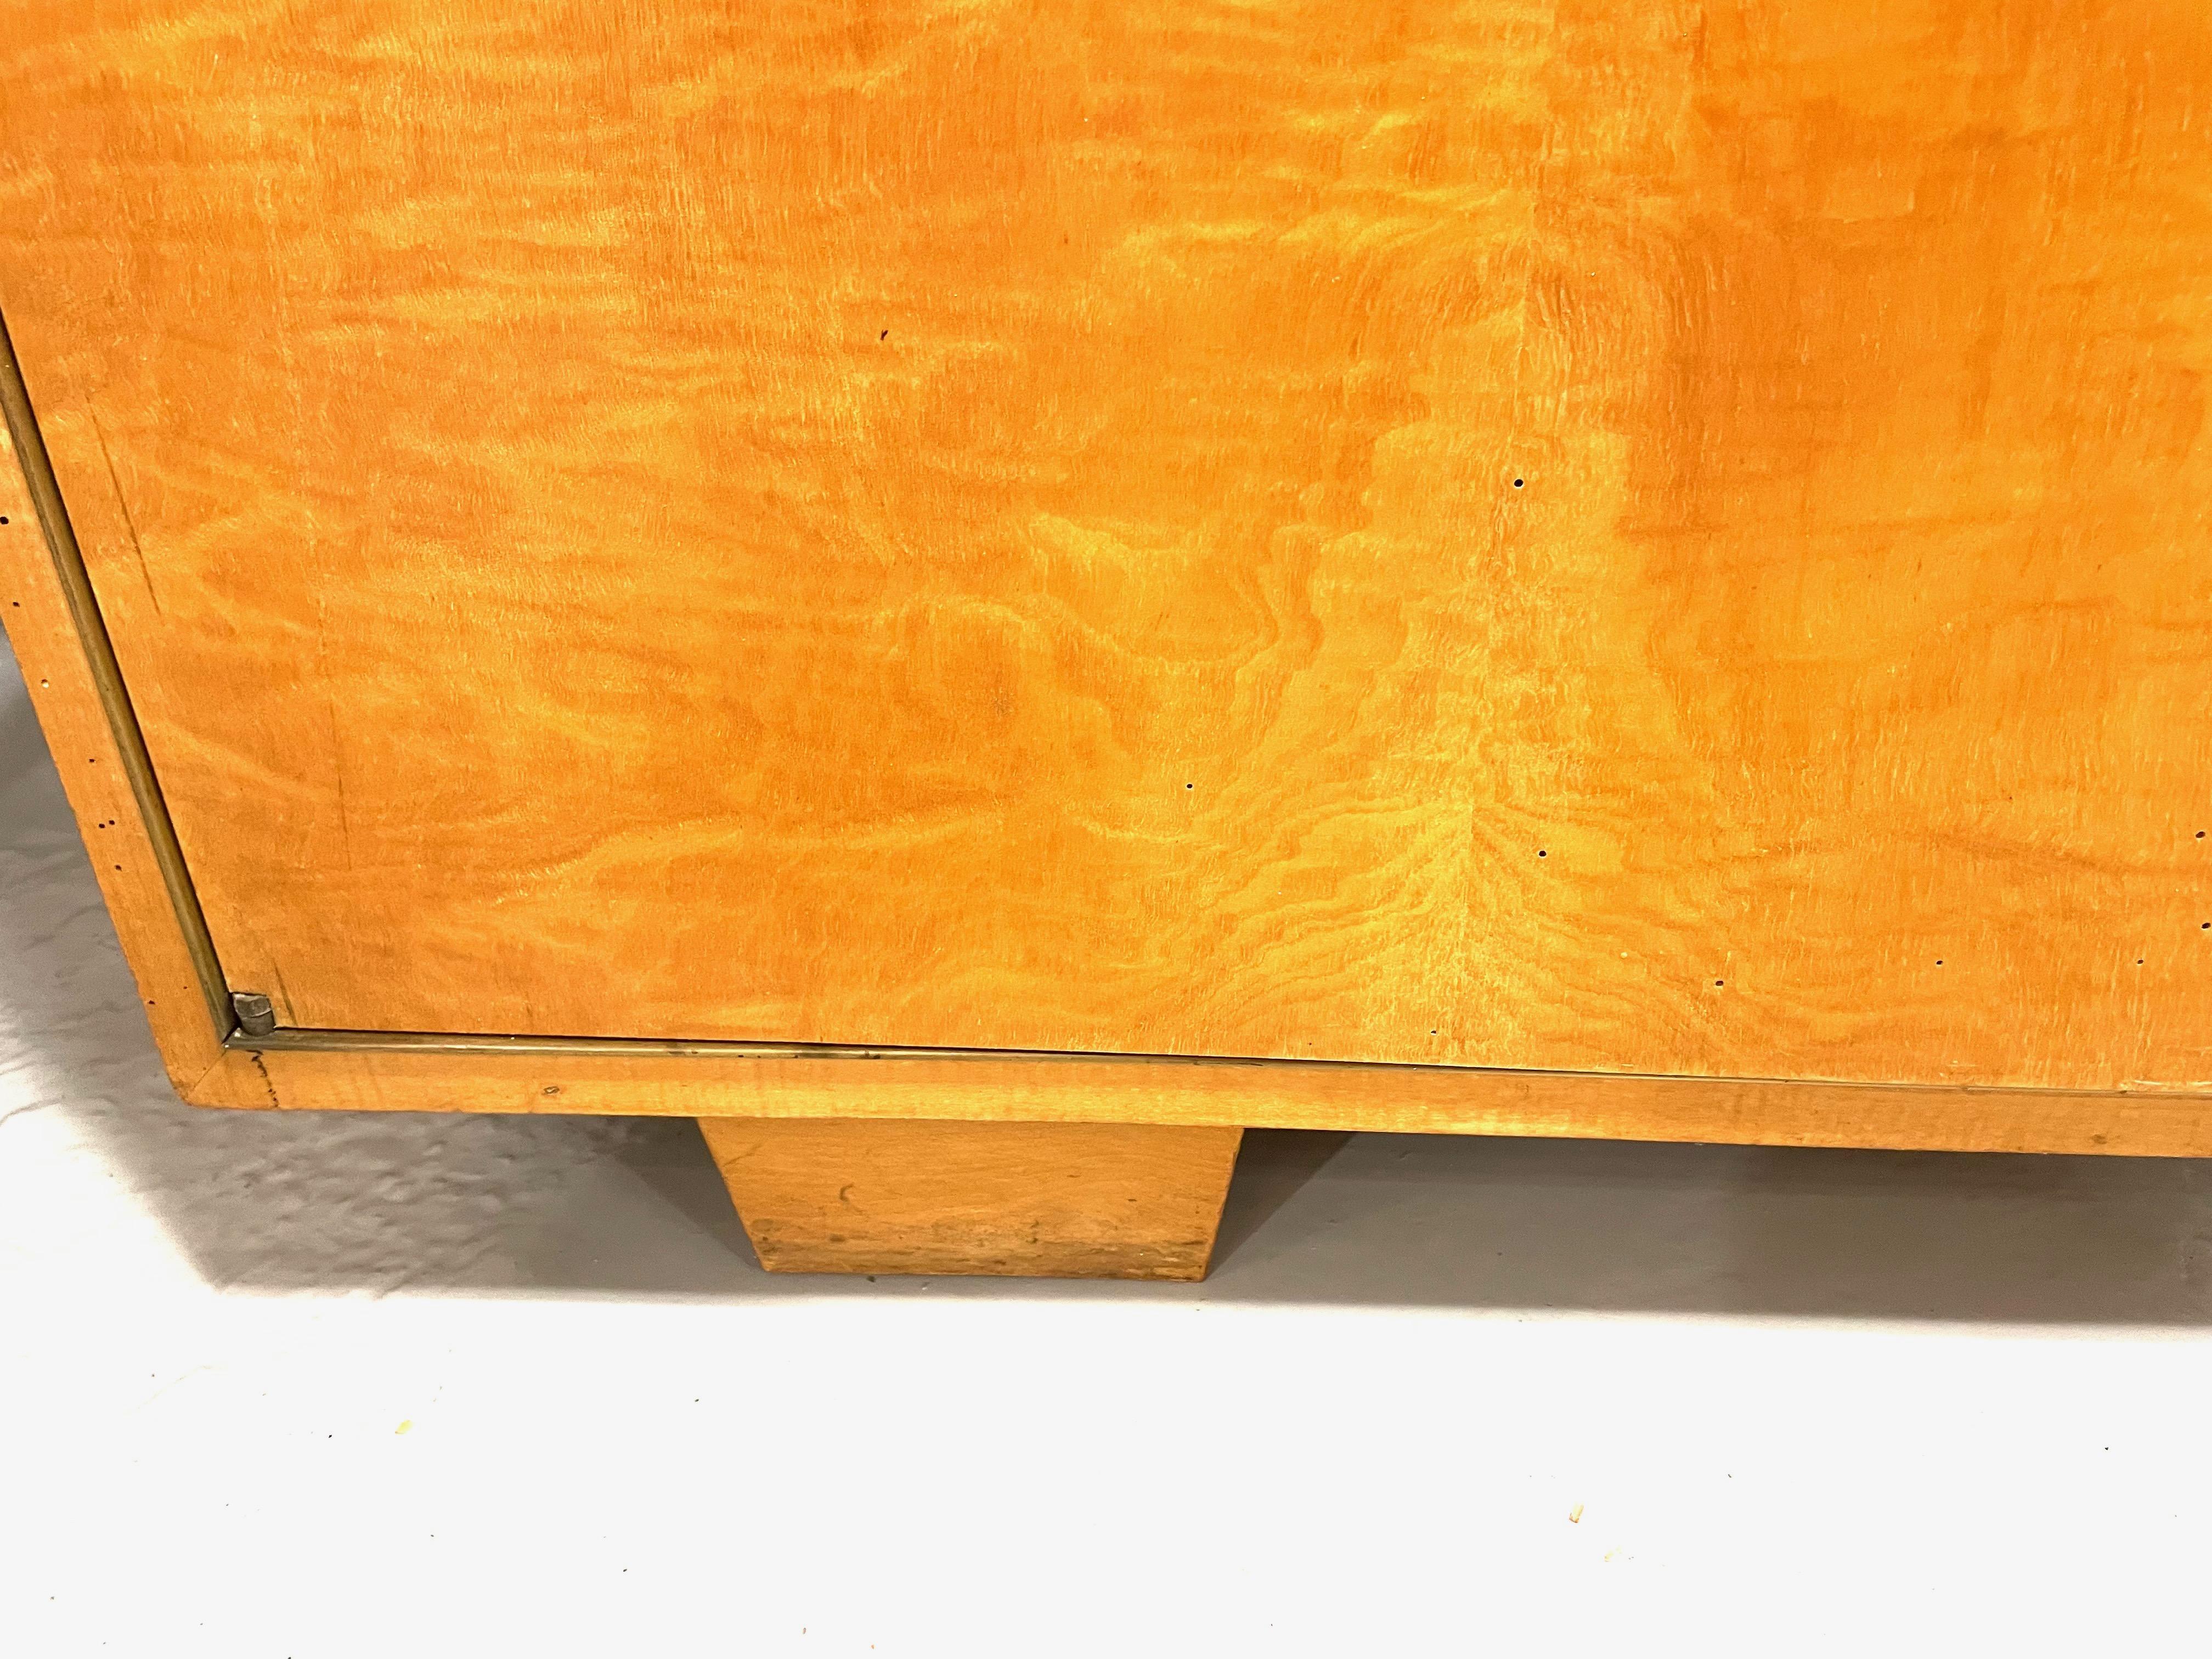 Art Deco Sycomore Sideboard With Multiple Drawers Attributed to De Coene-Belgium In Good Condition For Sale In Brussels, BE